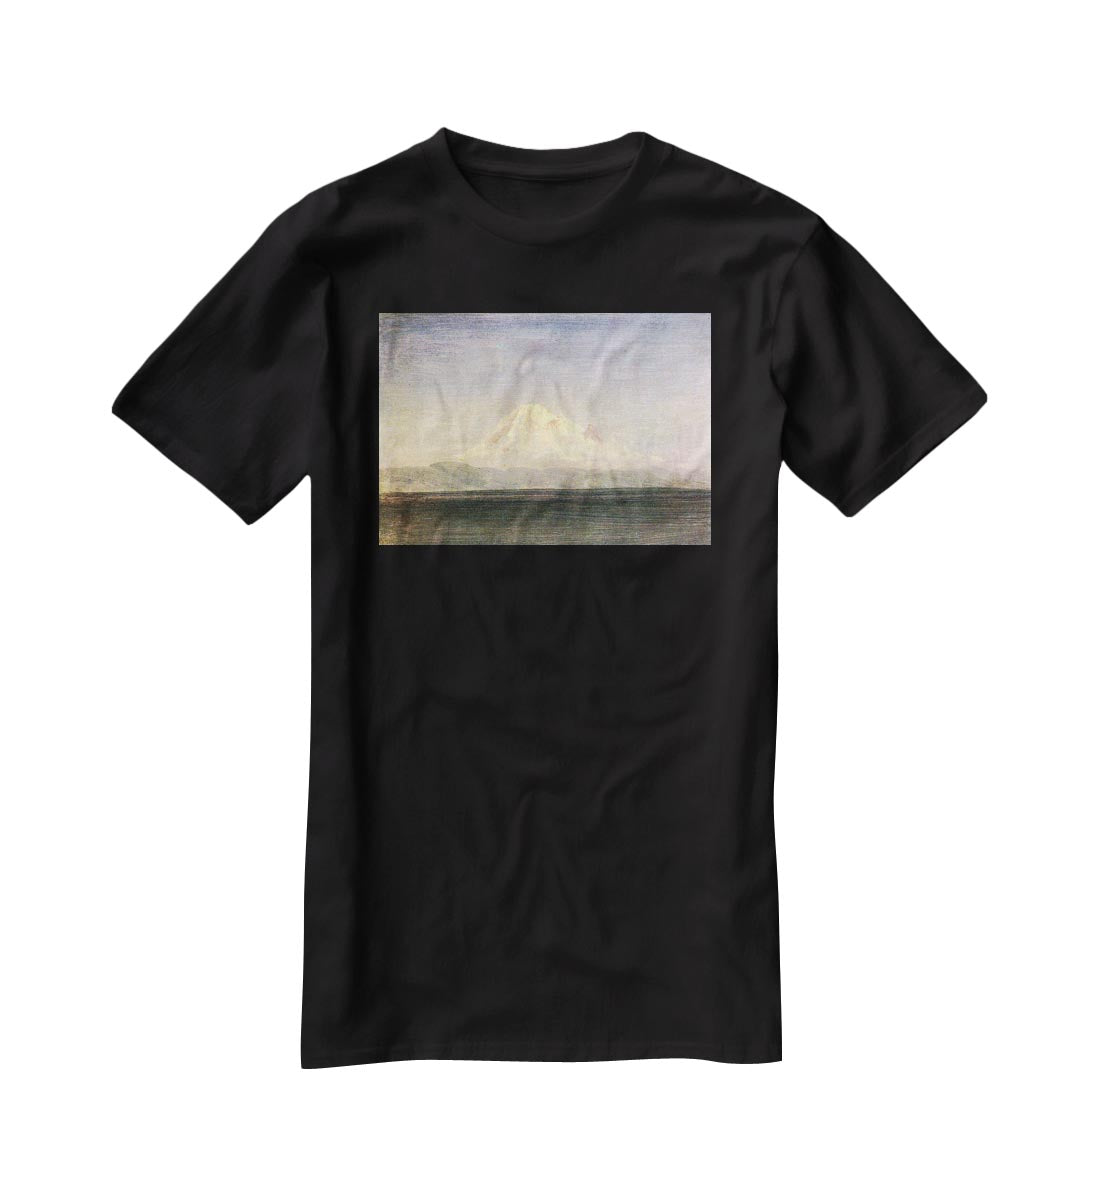 Snowy Mountains in the Pacific Northwest by Bierstadt T-Shirt - Canvas Art Rocks - 1